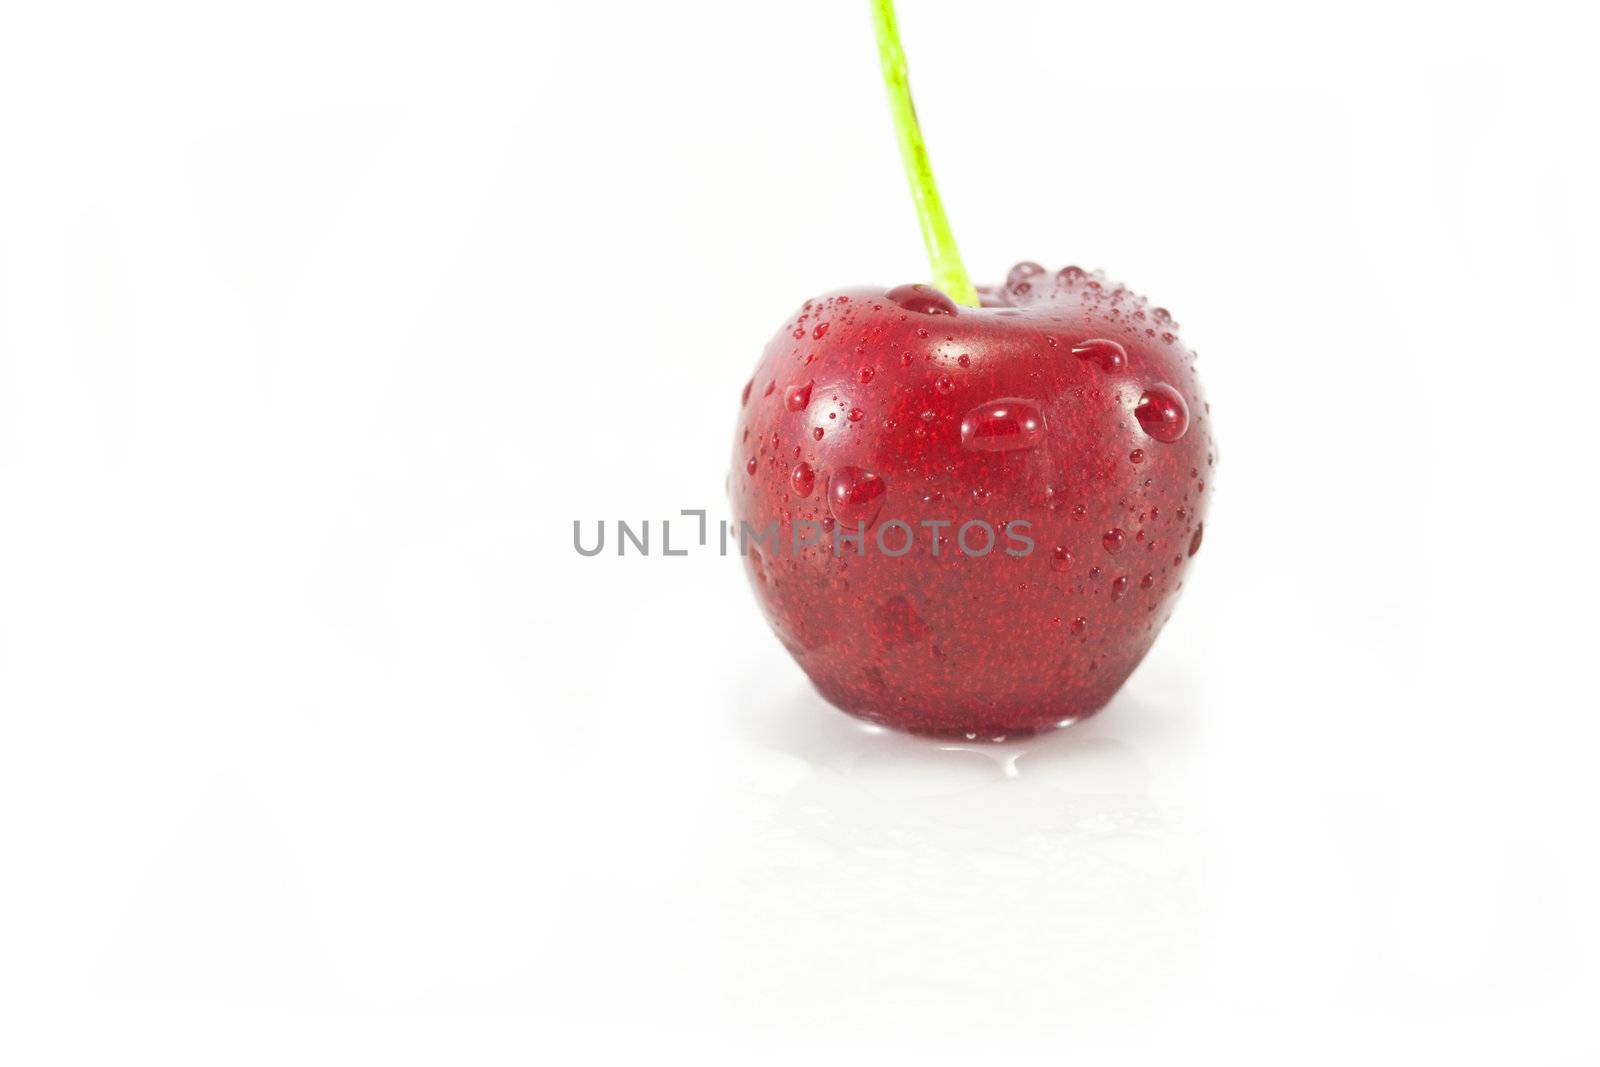 Single Cherry by ChrisAlleaume